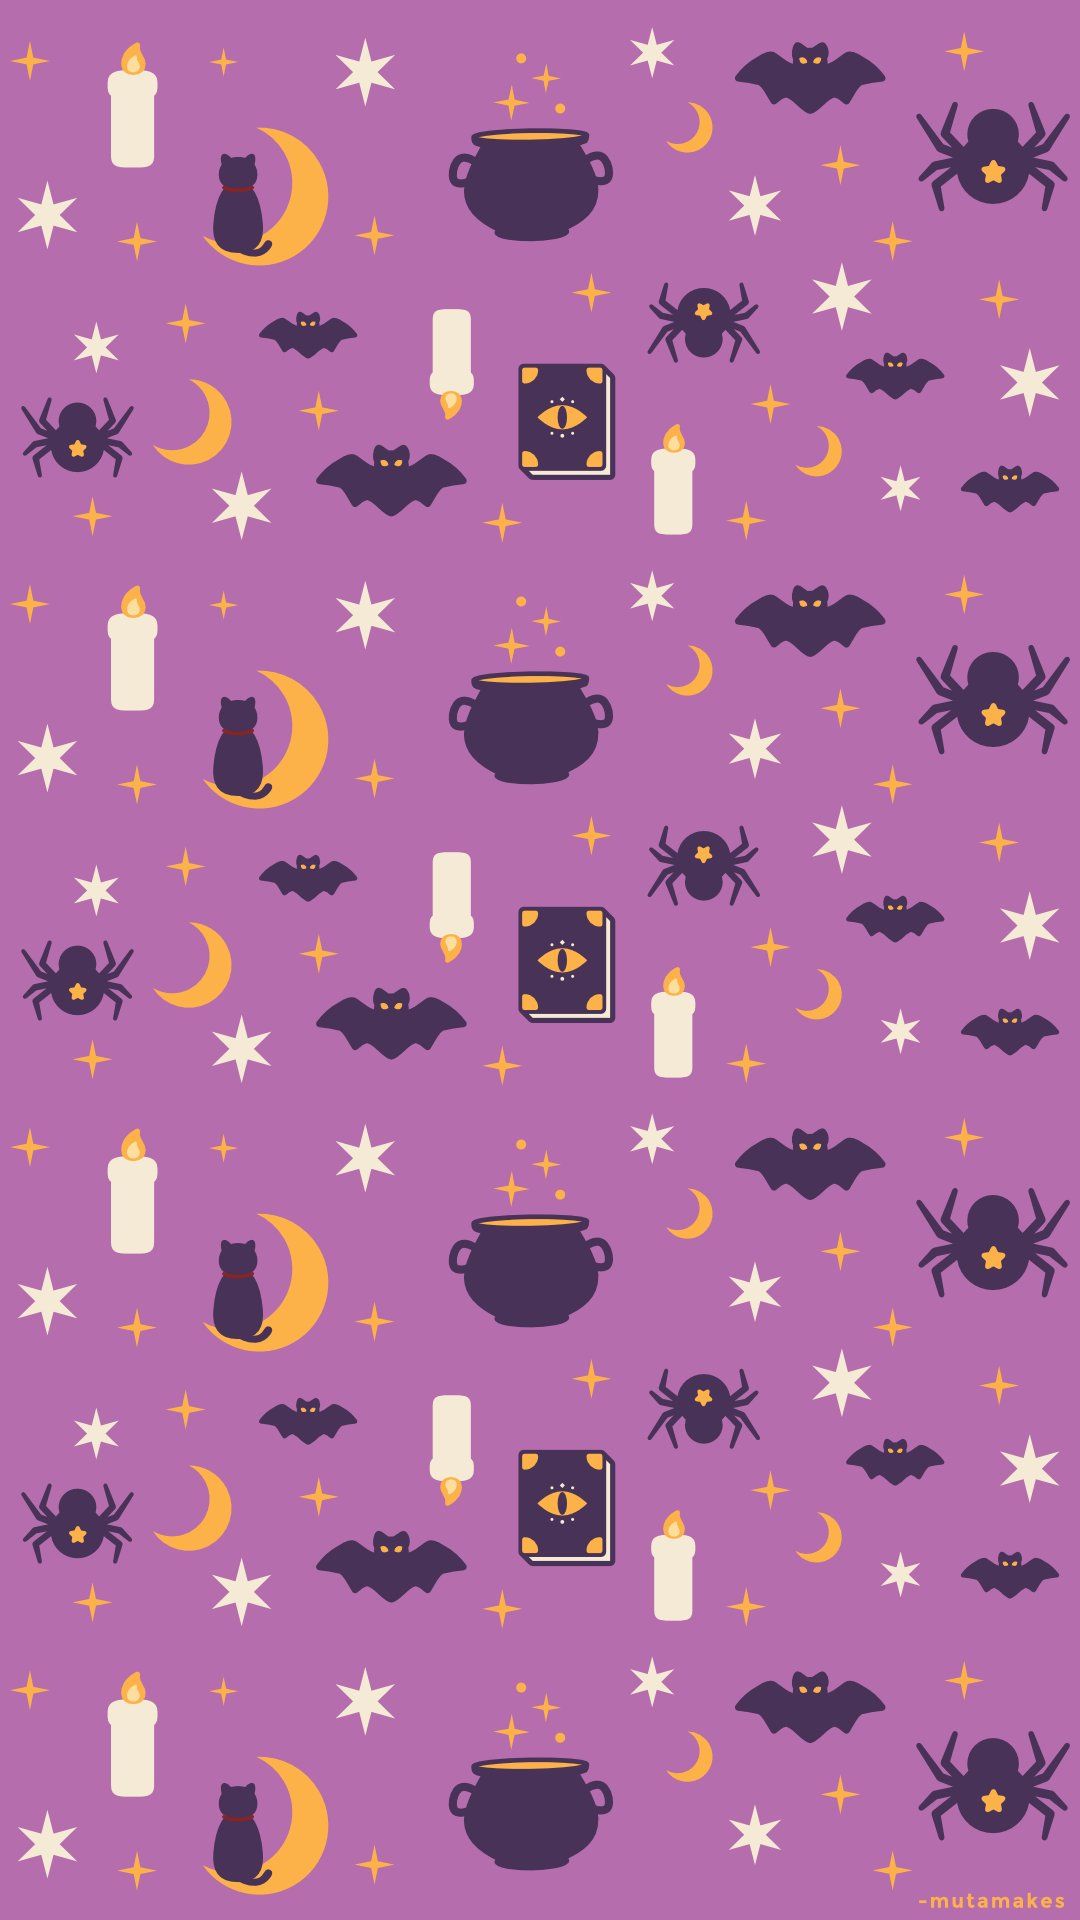 Halloween Cute Character Seamless Repeat Pattern On Purple Background  HighRes Vector Graphic  Getty Images